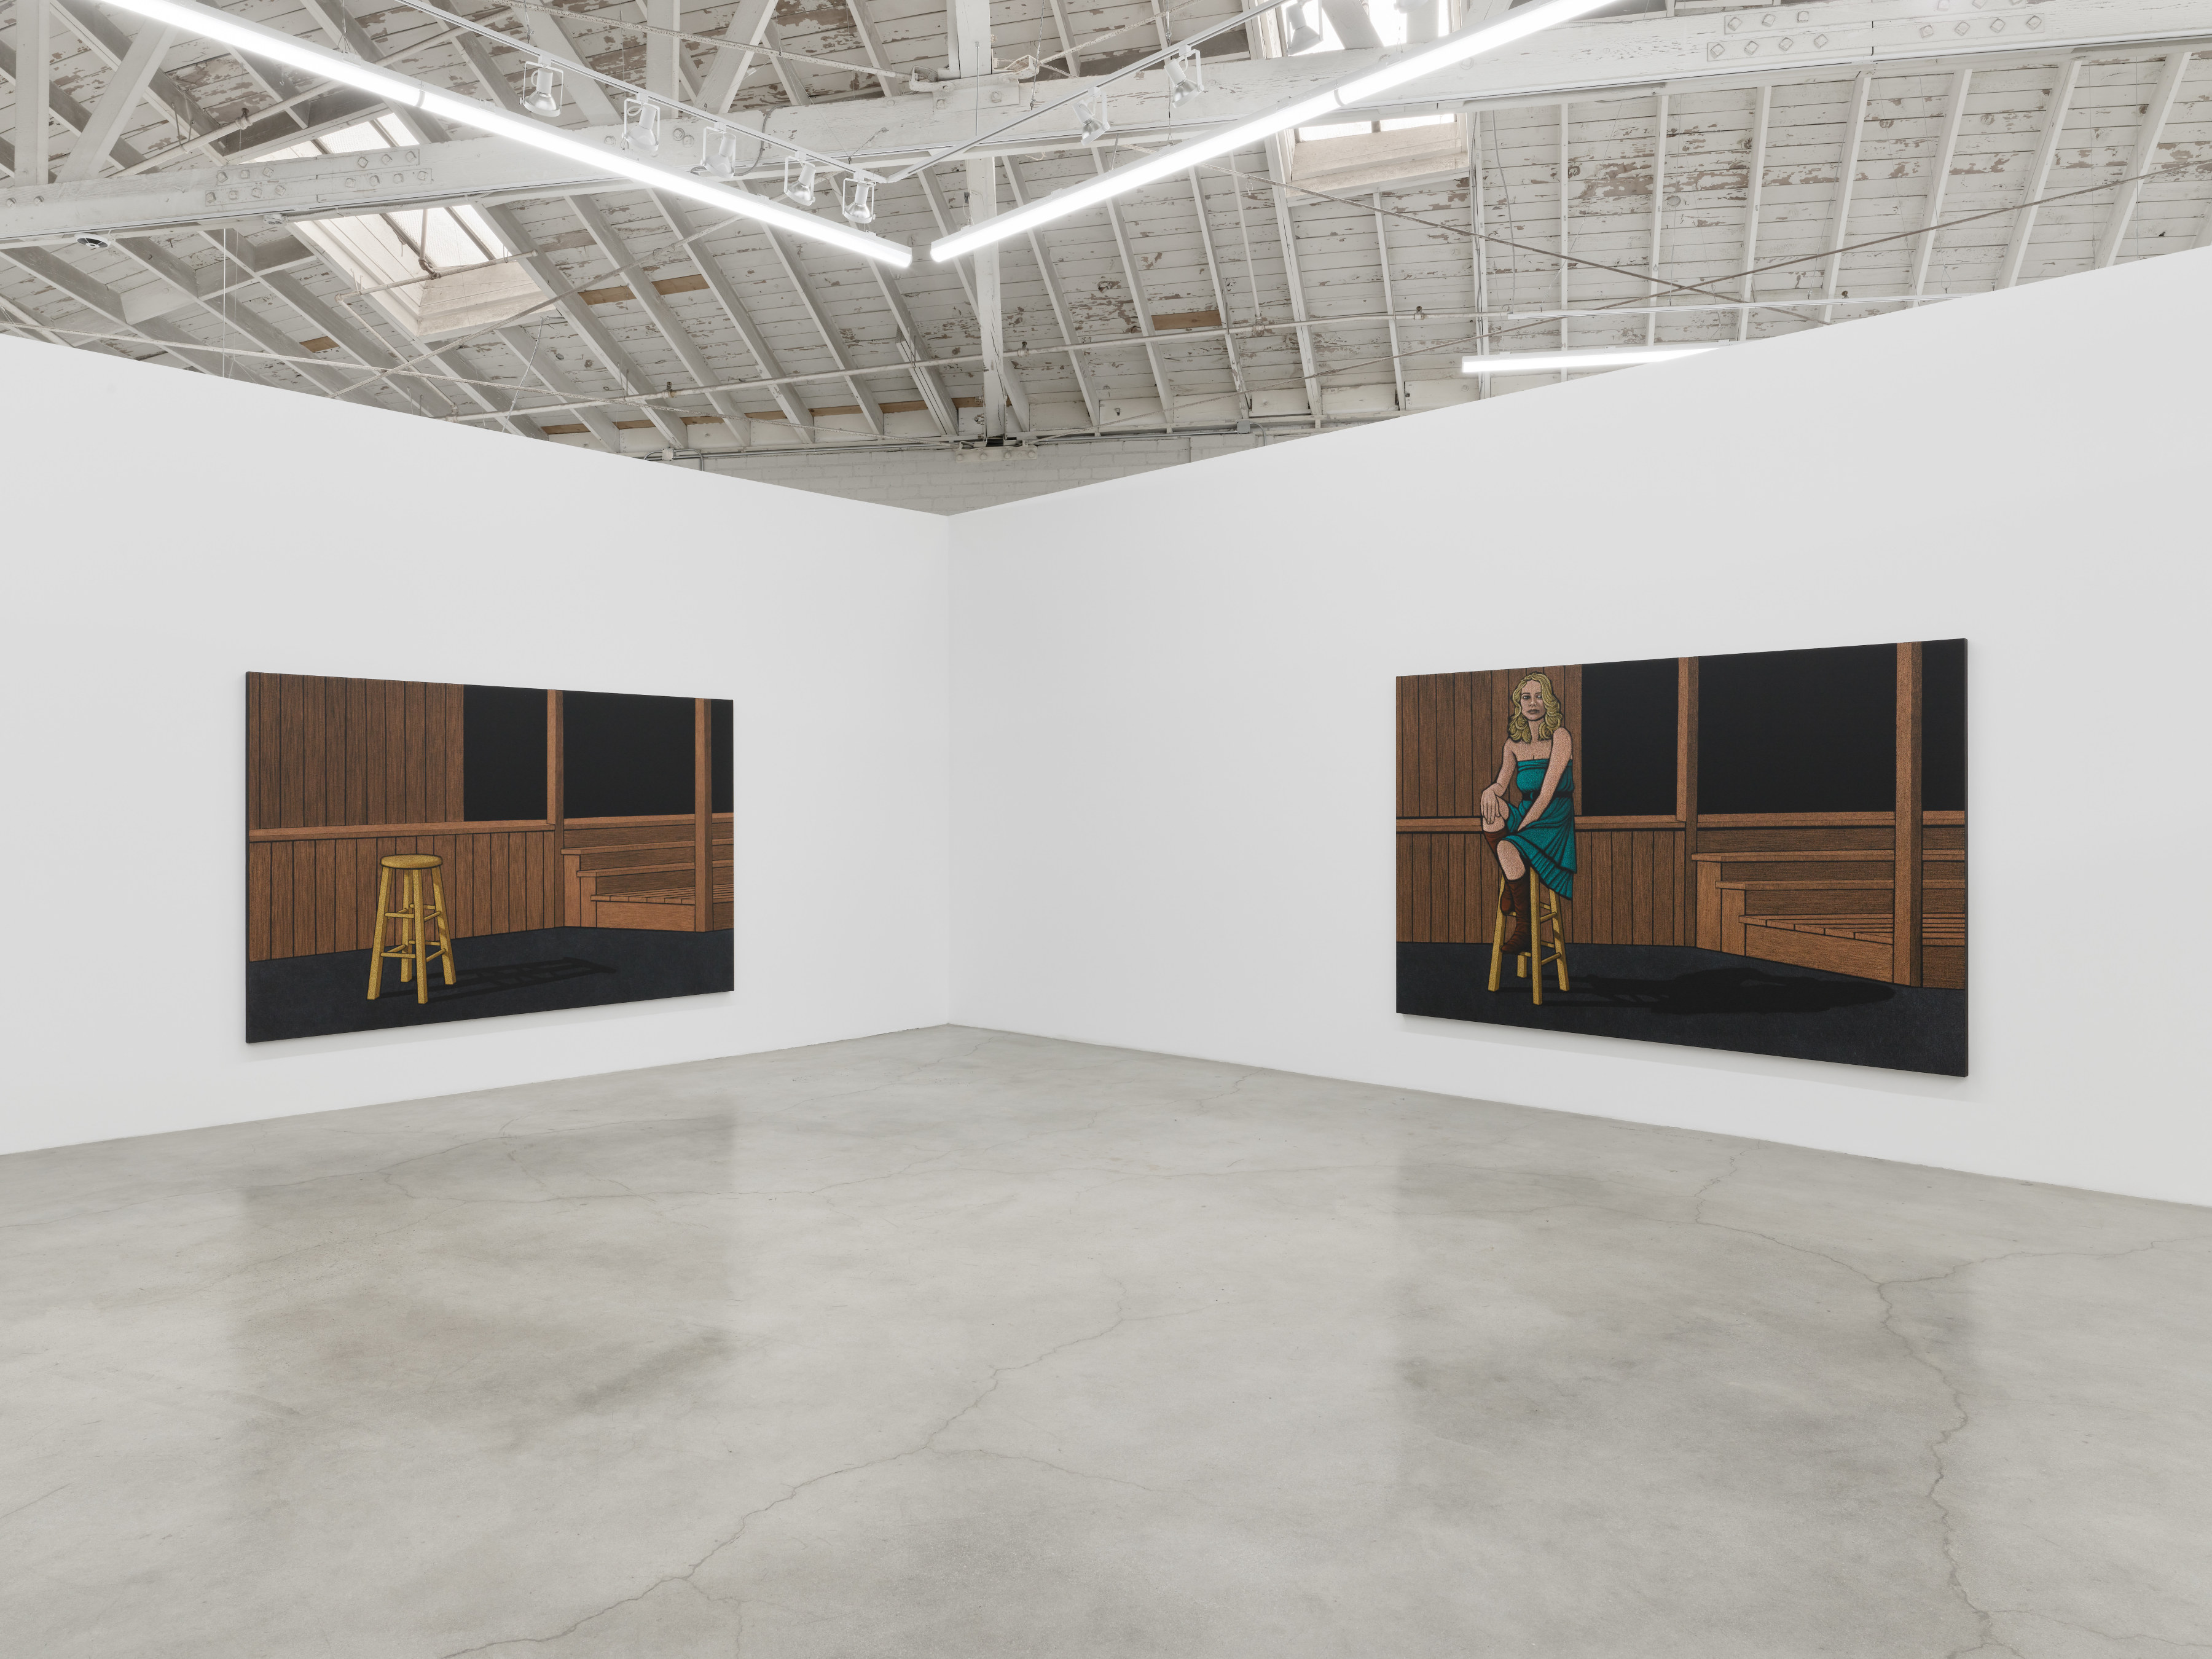 Installation view of Amy Adler's "Audition" at Night Gallery. 